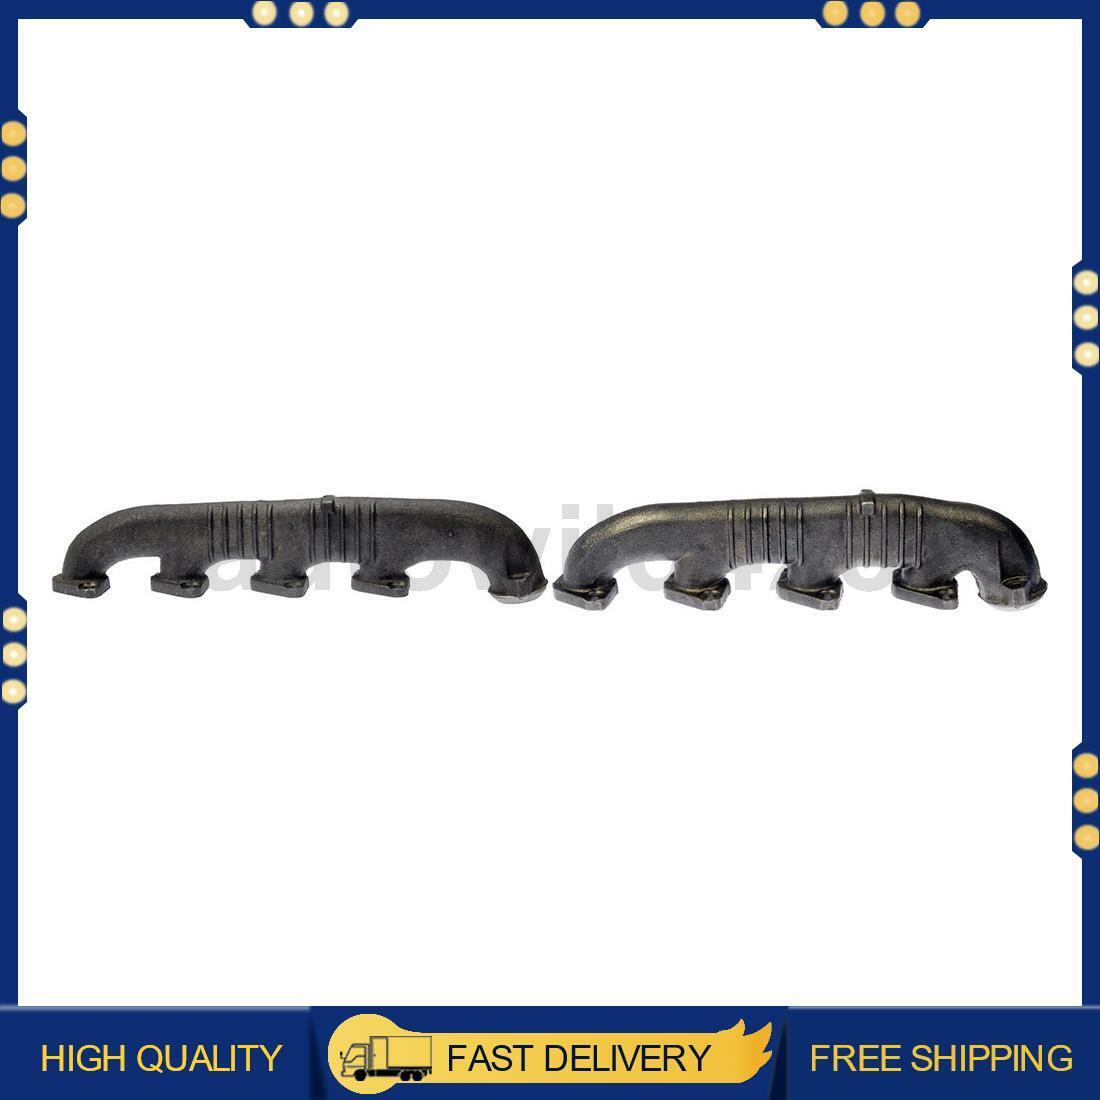 2PCS Dorman Exhaust Manifold Left Right For Ford E-350 Club Wagon 2004-2005